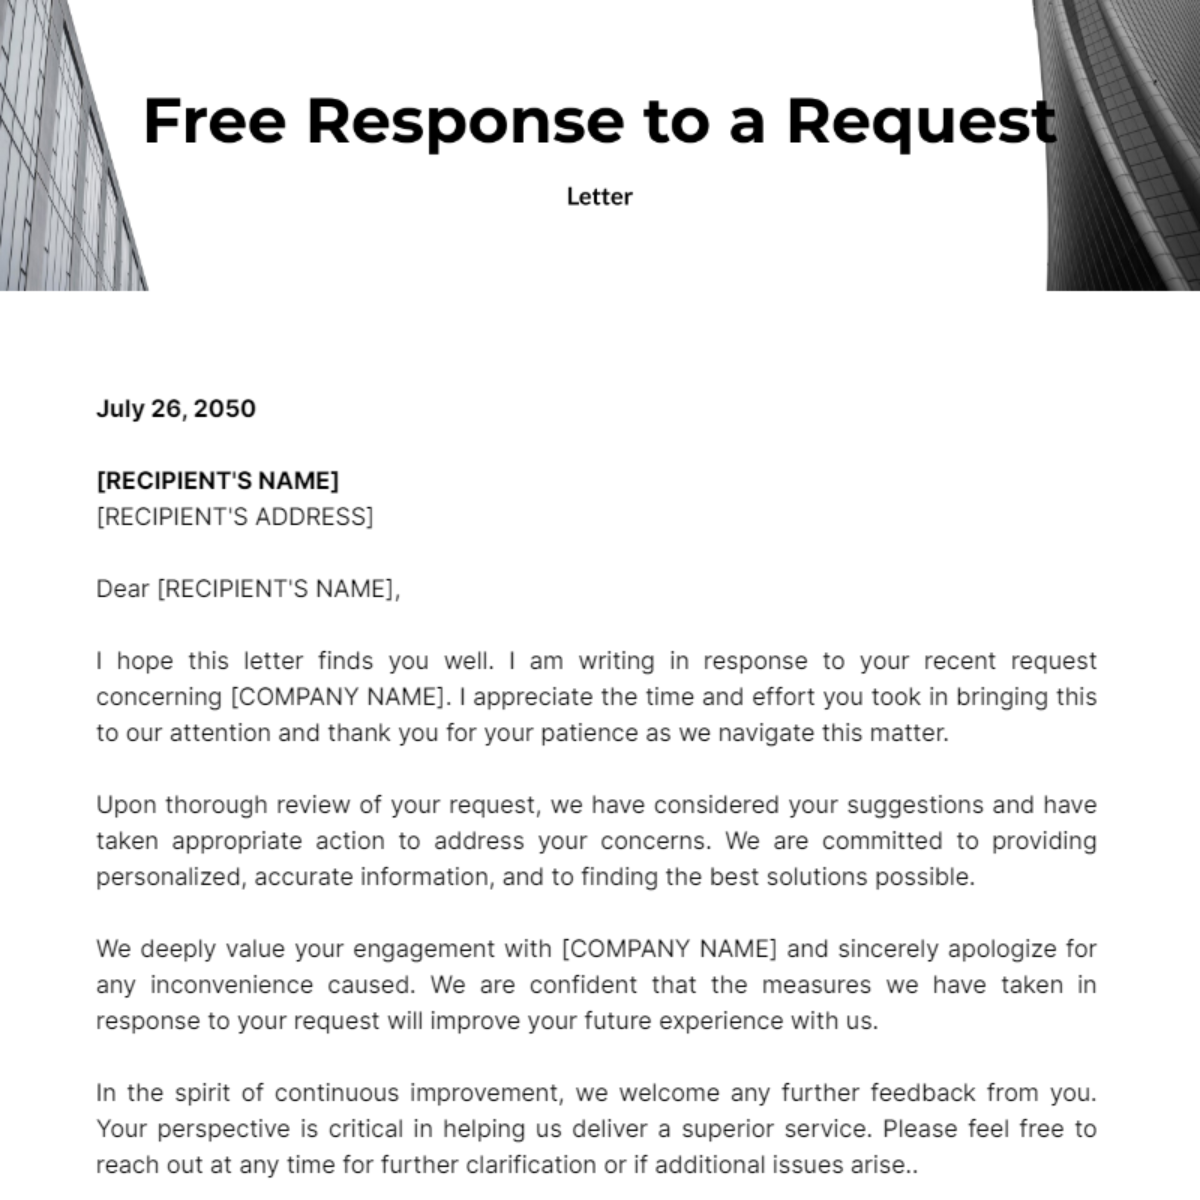 Free Response Letter to a Request